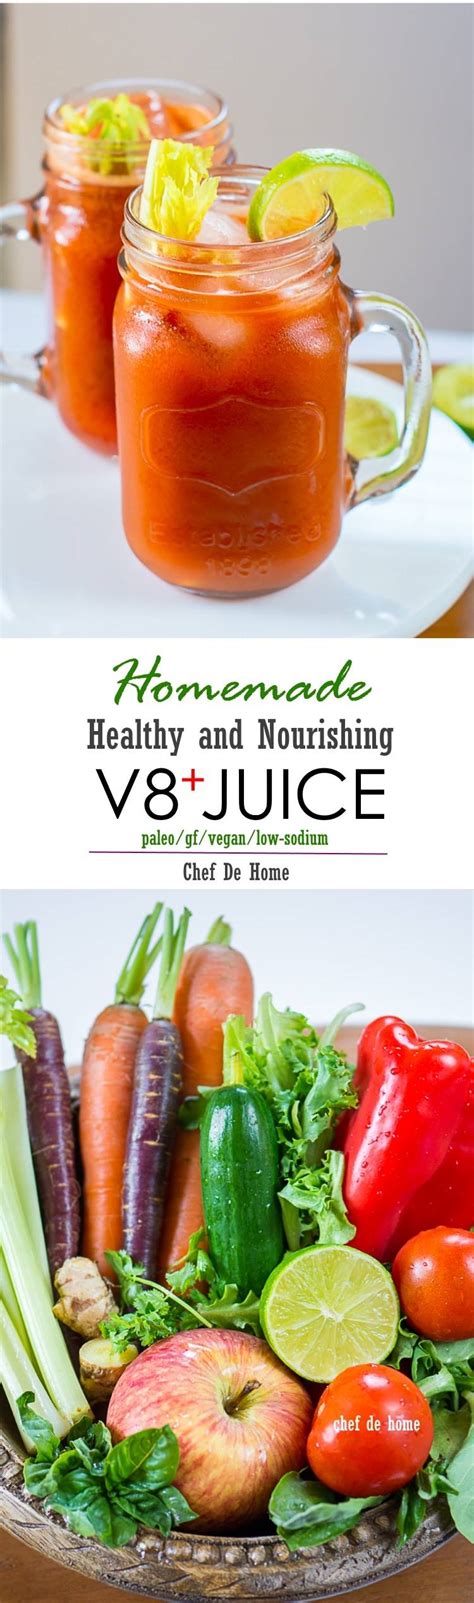 V8 Juice Plus Homemade And Healthy Recipe